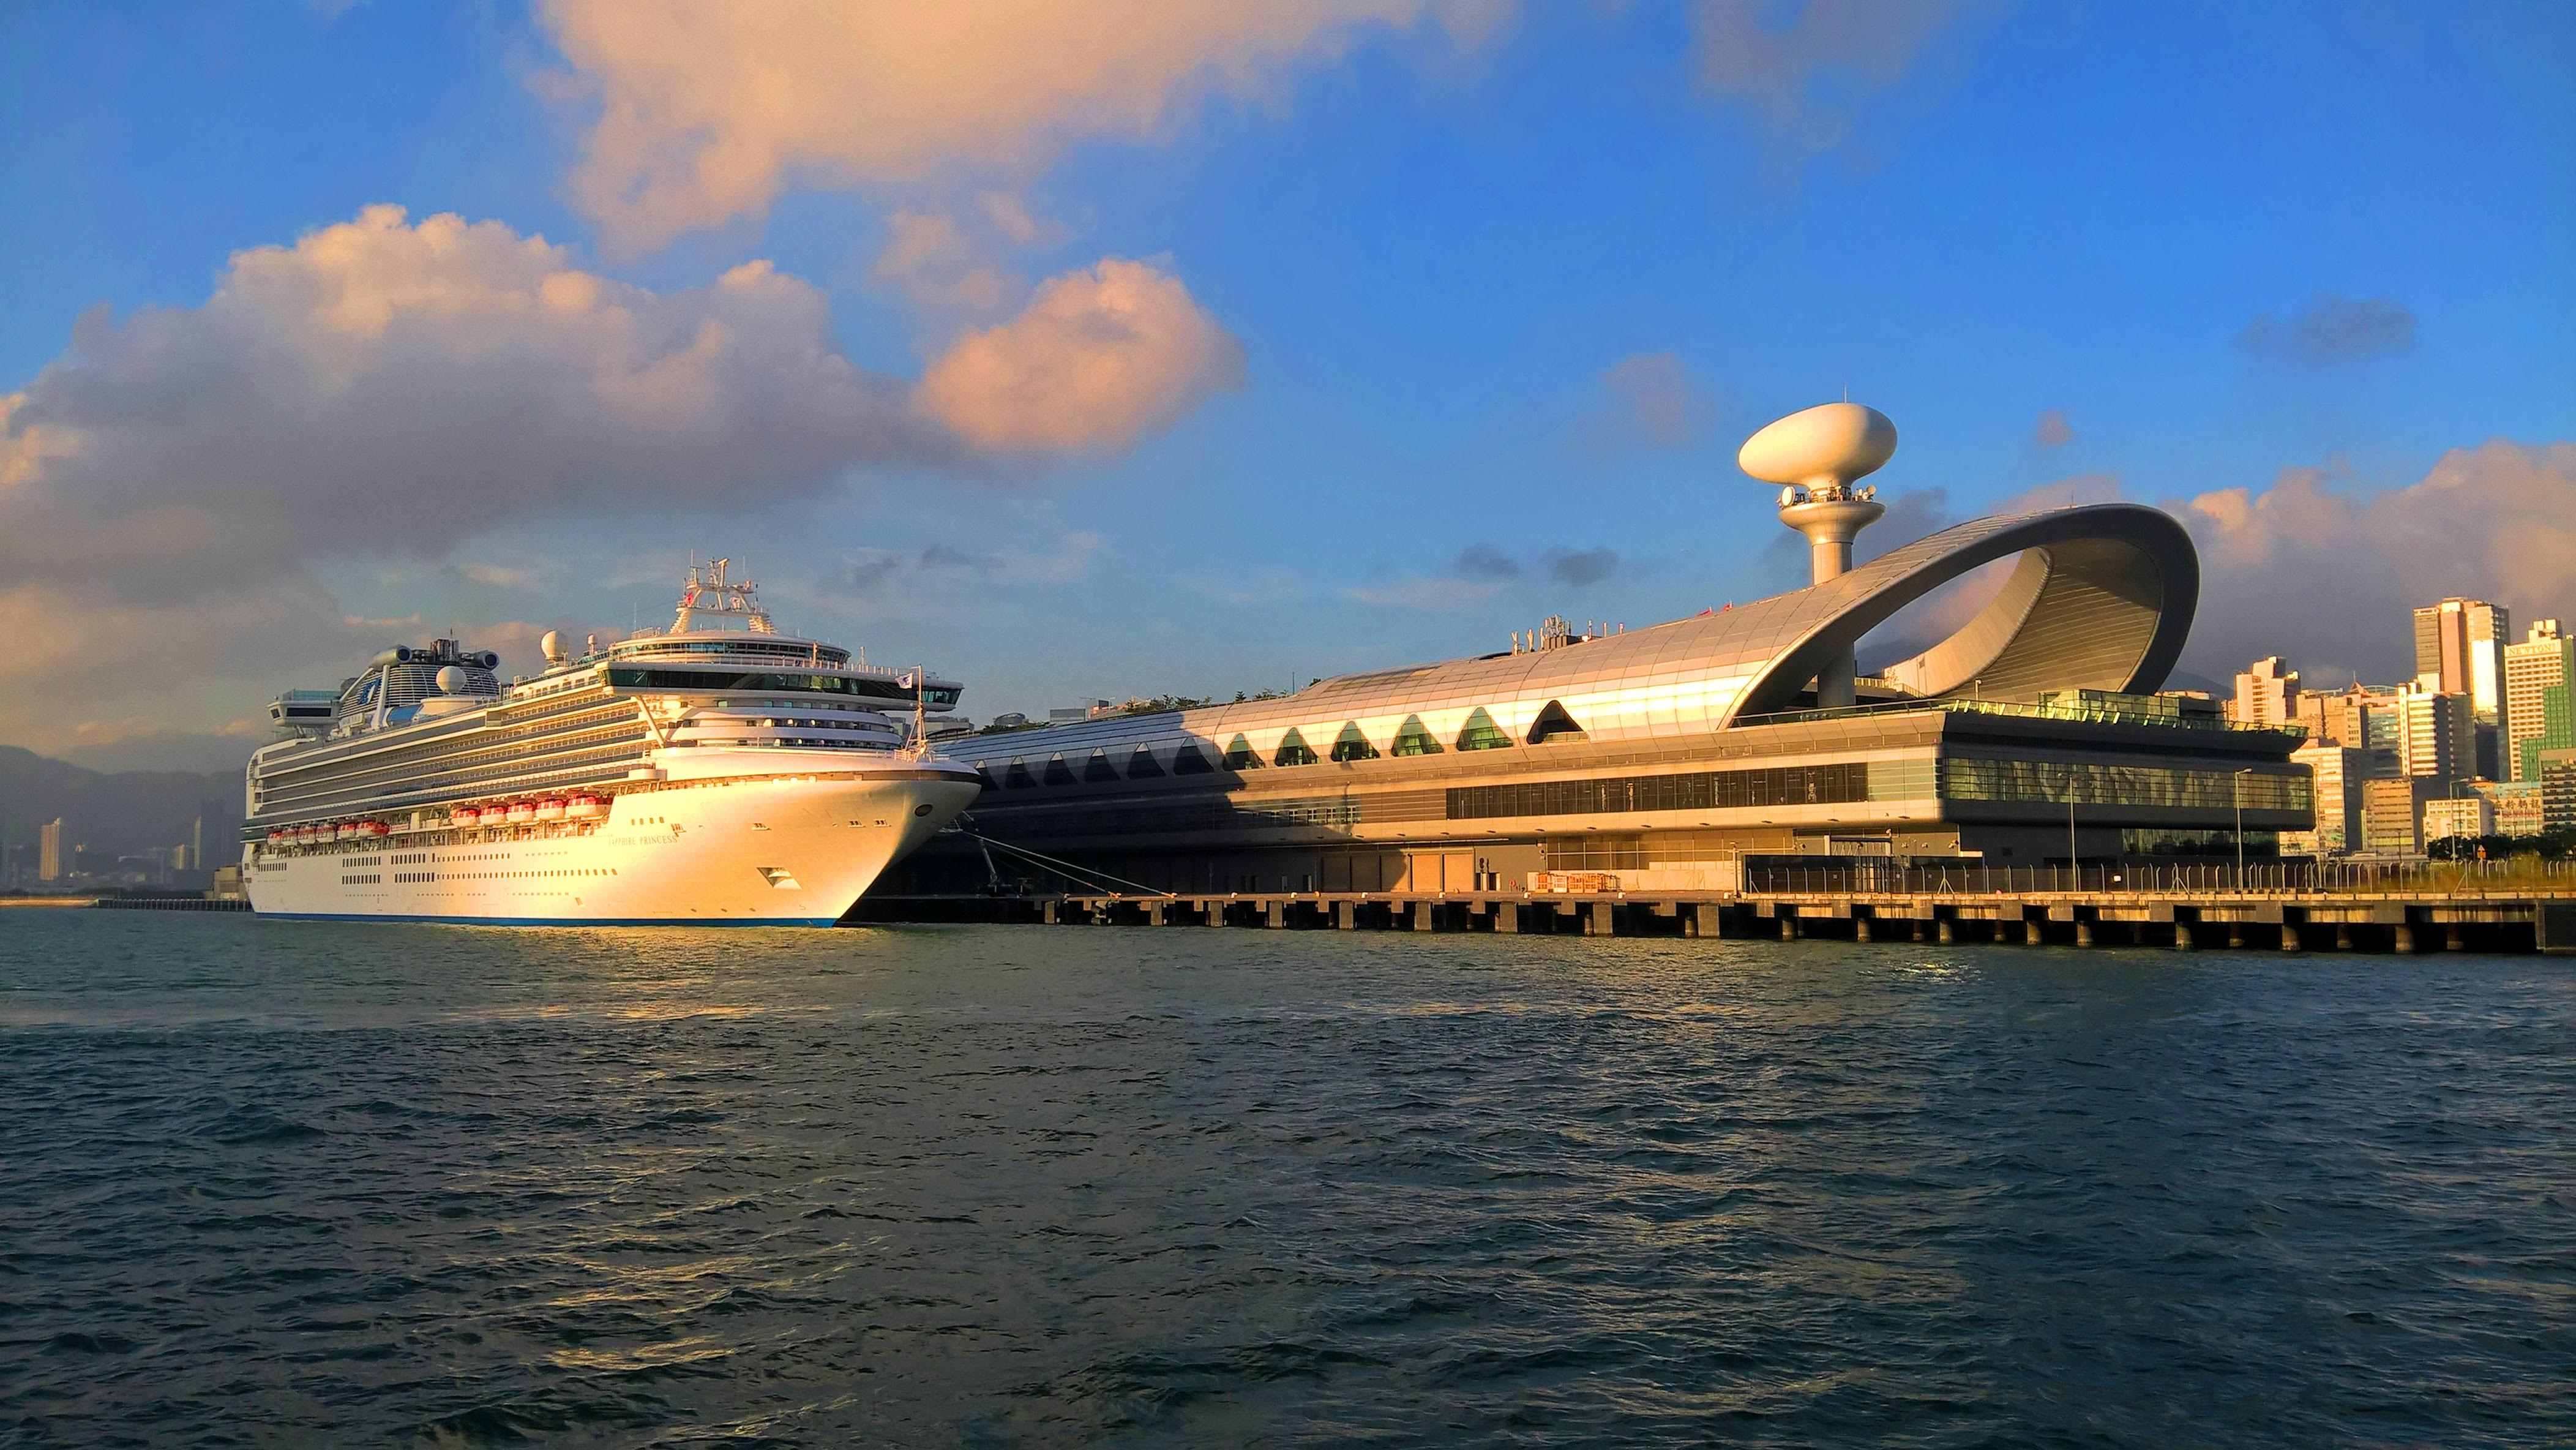 Plan your future cruise and shore excursion through reading